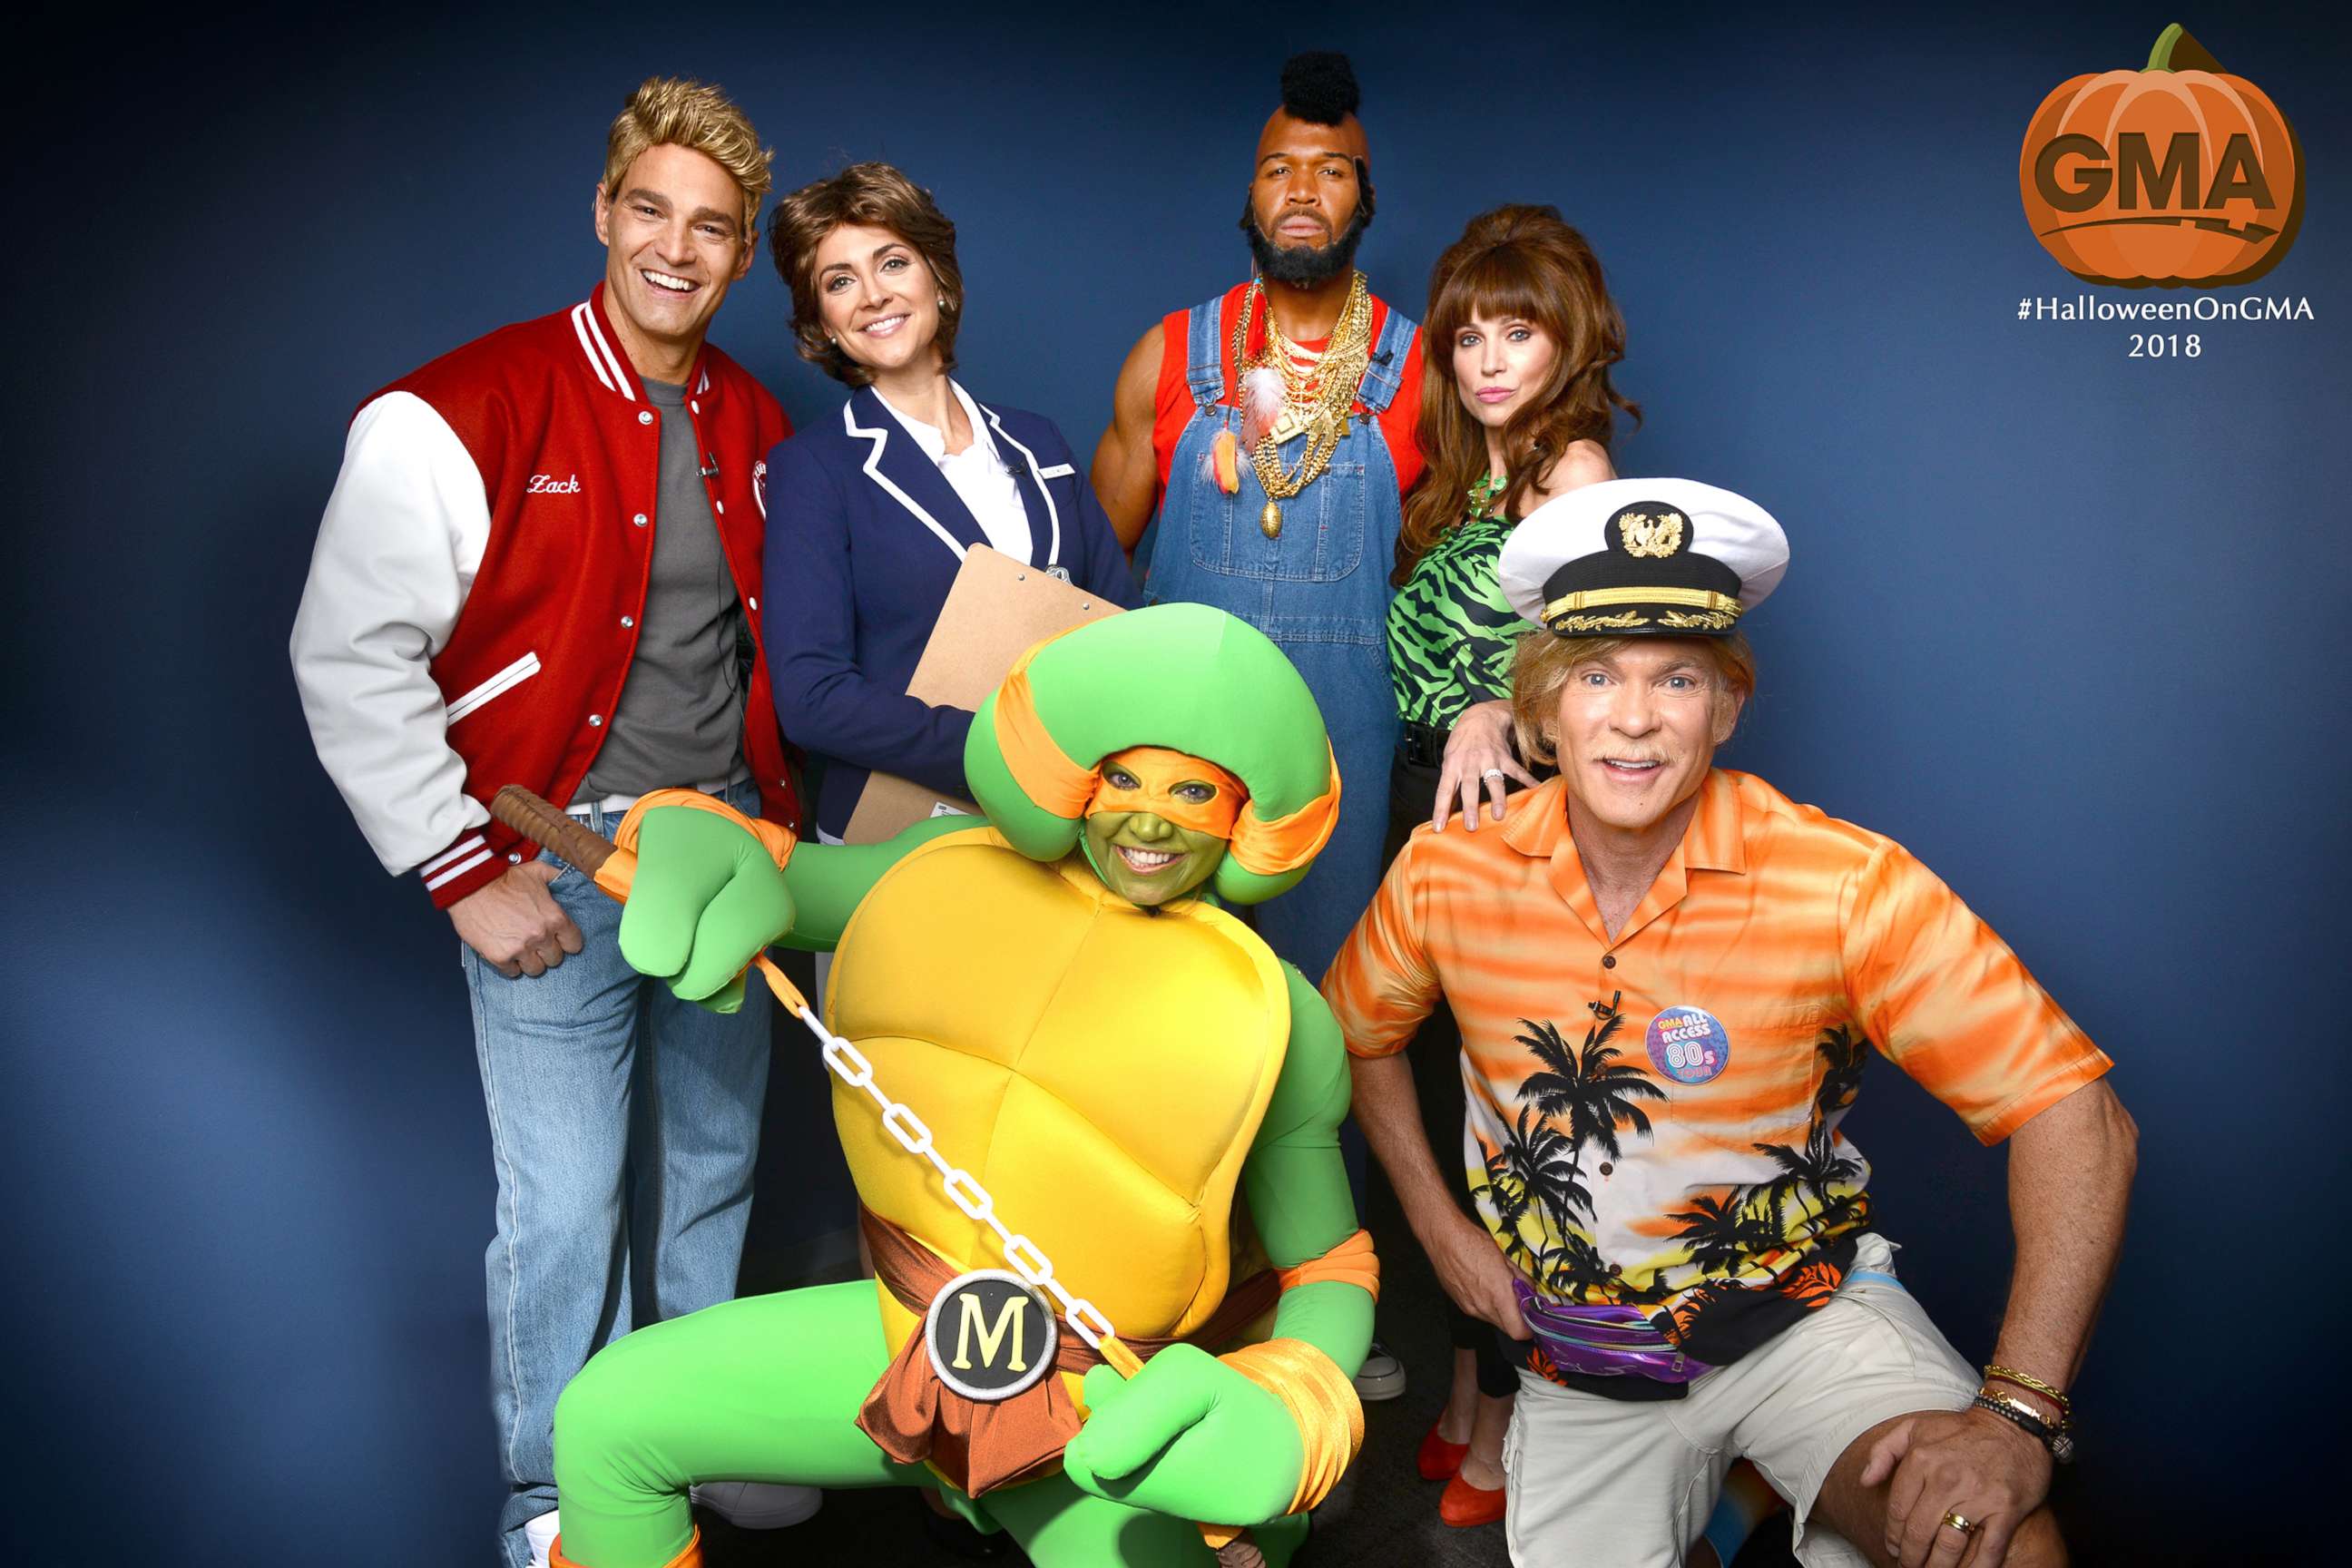 PHOTO: "GMA" anchors celebrate Halloween in '80s style.